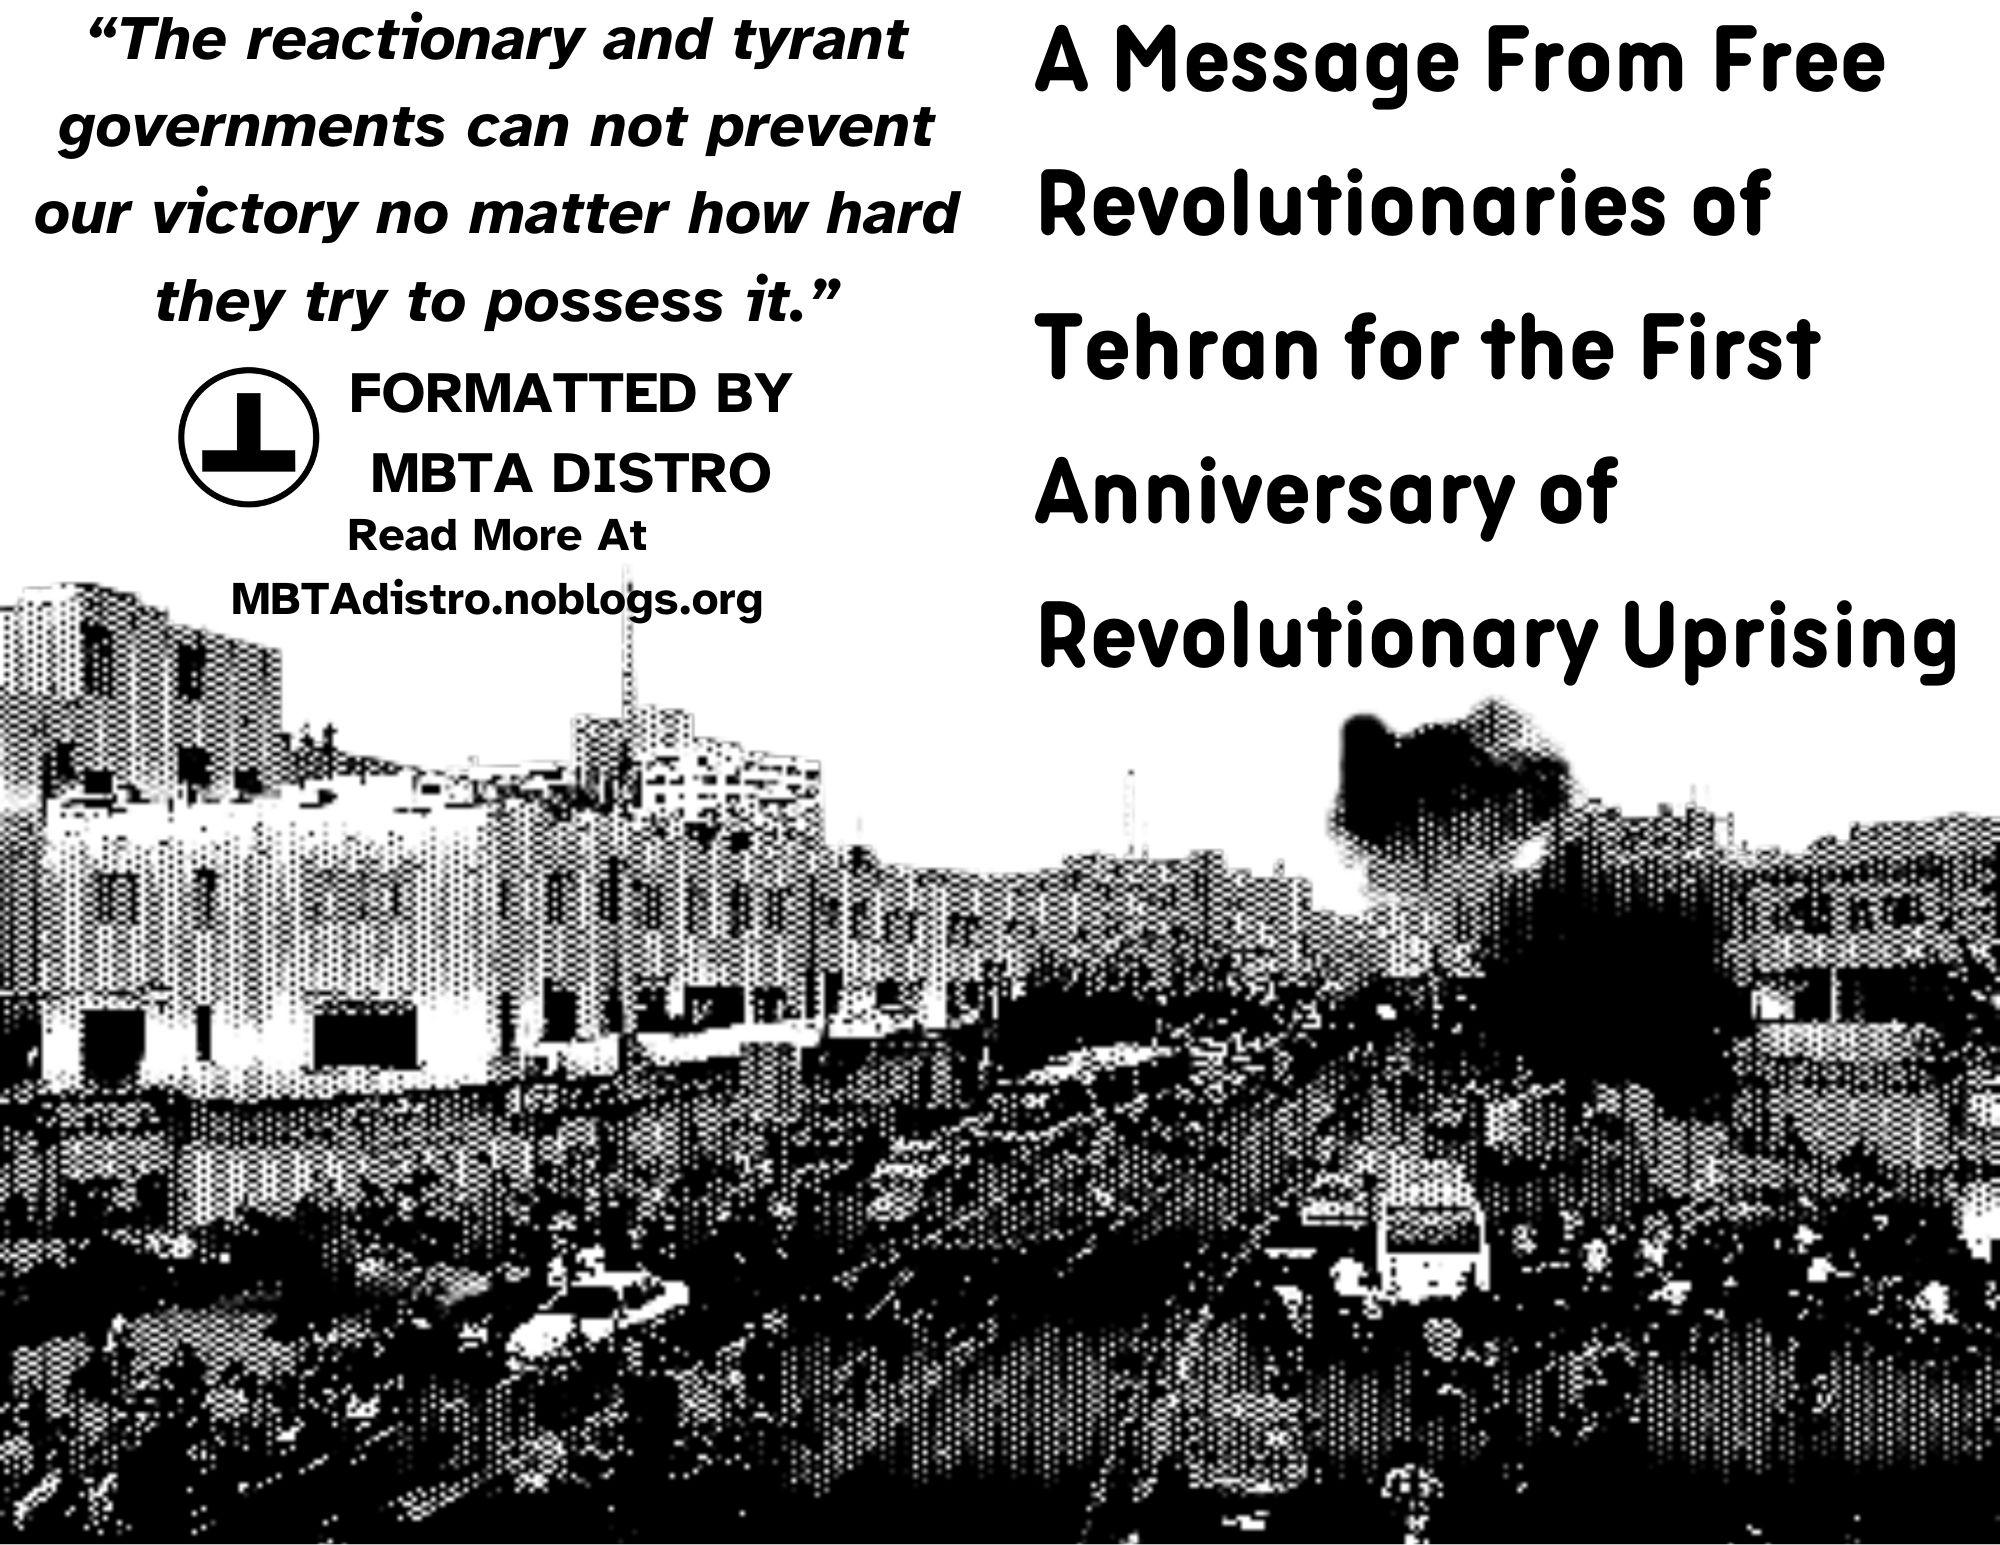 The cover of a zine. The text of the title, on the right, reads "A Message From Free Revolutionaries of Tehran for the First Anniversary of Revolutionary Uprising